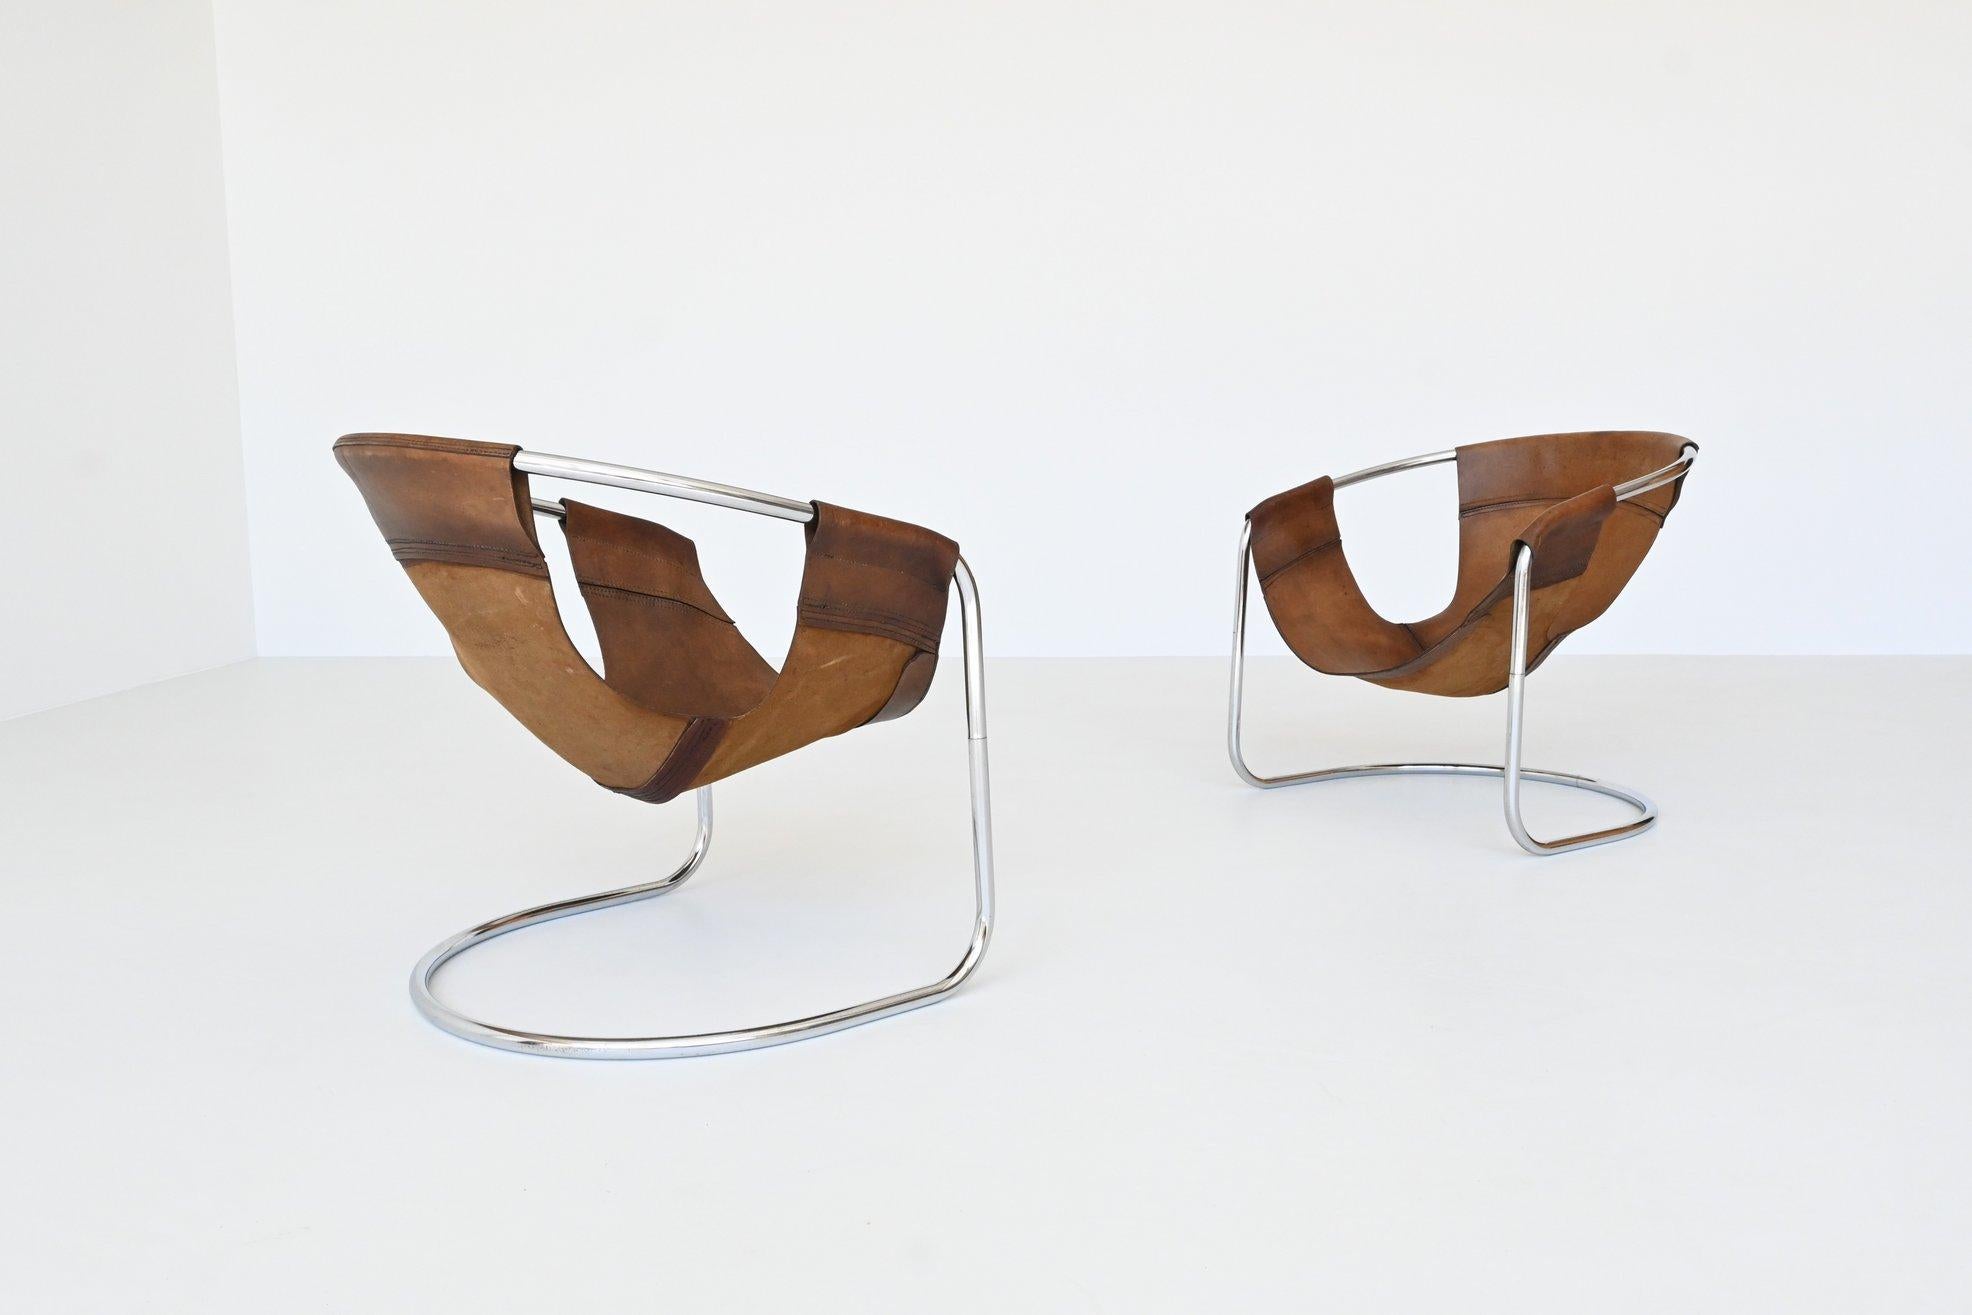 Fantastic pair of lounge chairs designed by Clemens Claessen and manufactured by Ba-as Eindhoven, The Netherlands 1965. These very nice shaped lounge chair have a tubular chrome plated metal frame that exists in two parts and the seats are made of